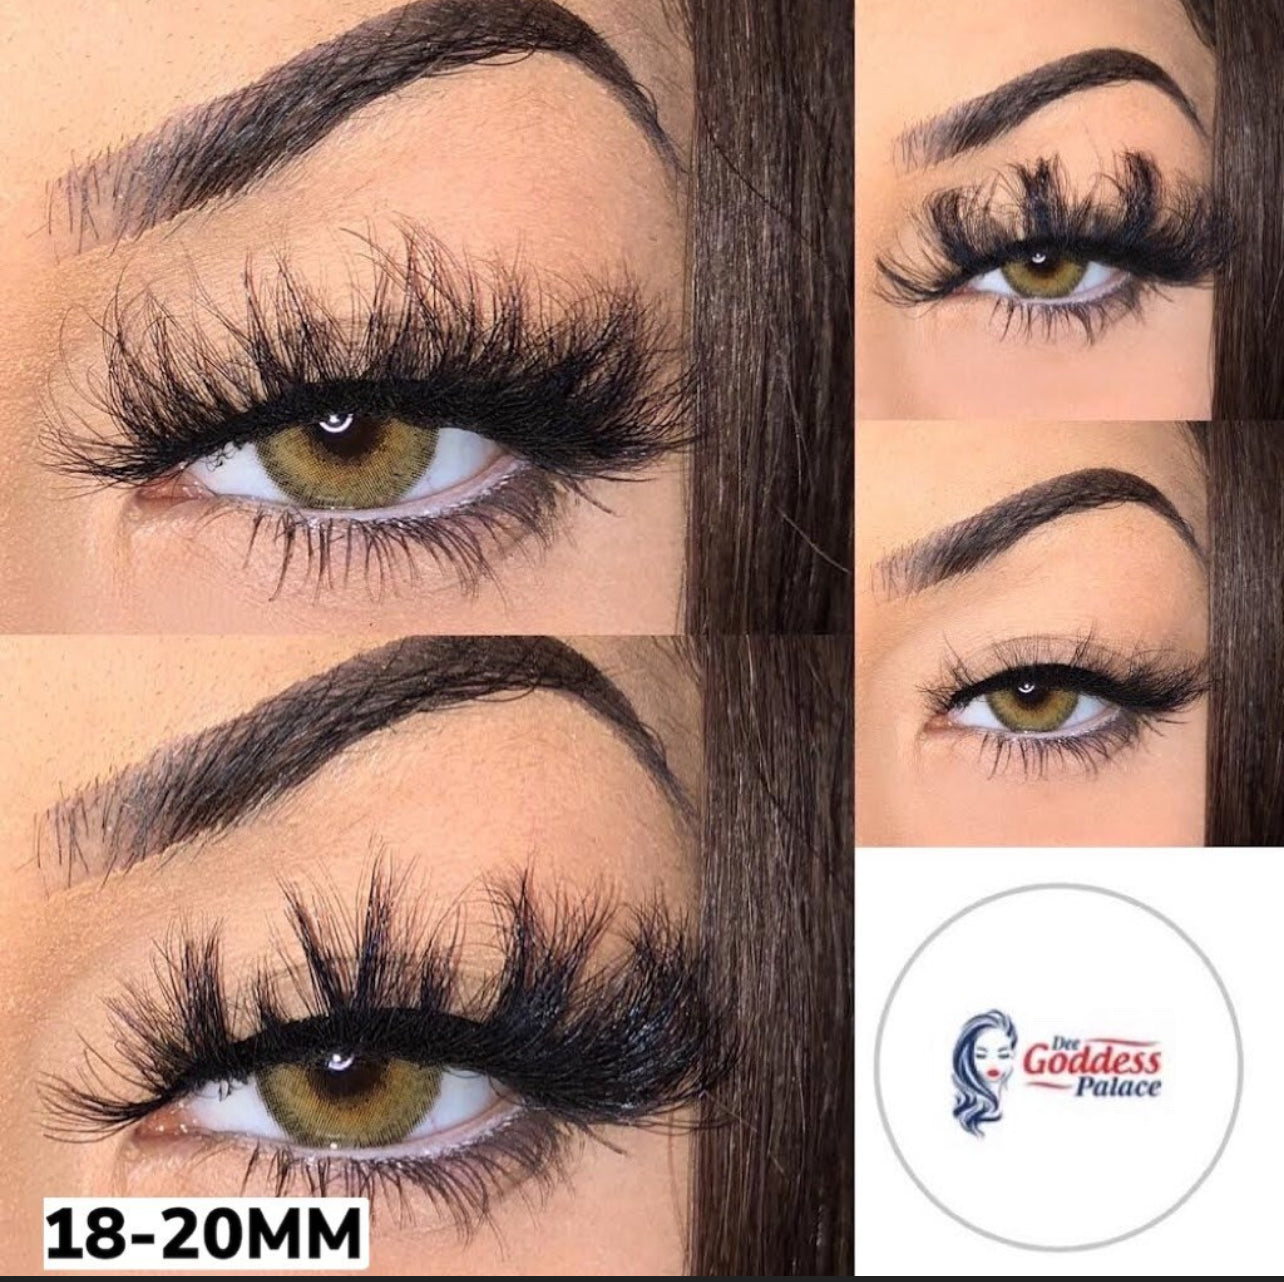 Wholesale Lashes 18-20MM (High Quality)